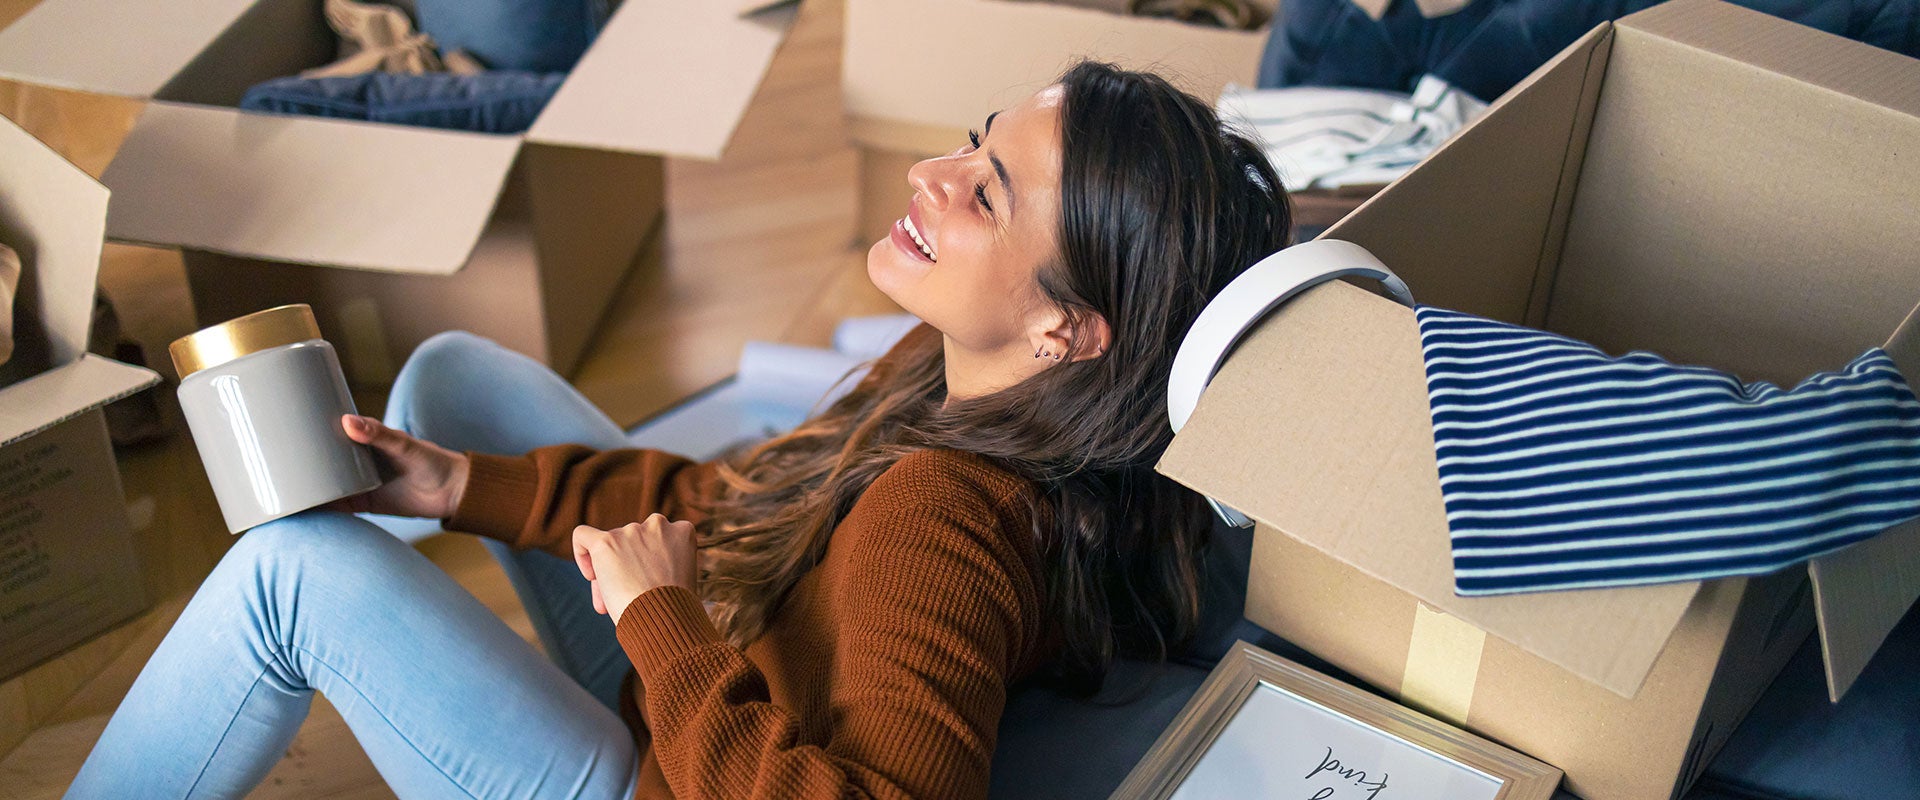 woman laughing next to boxes